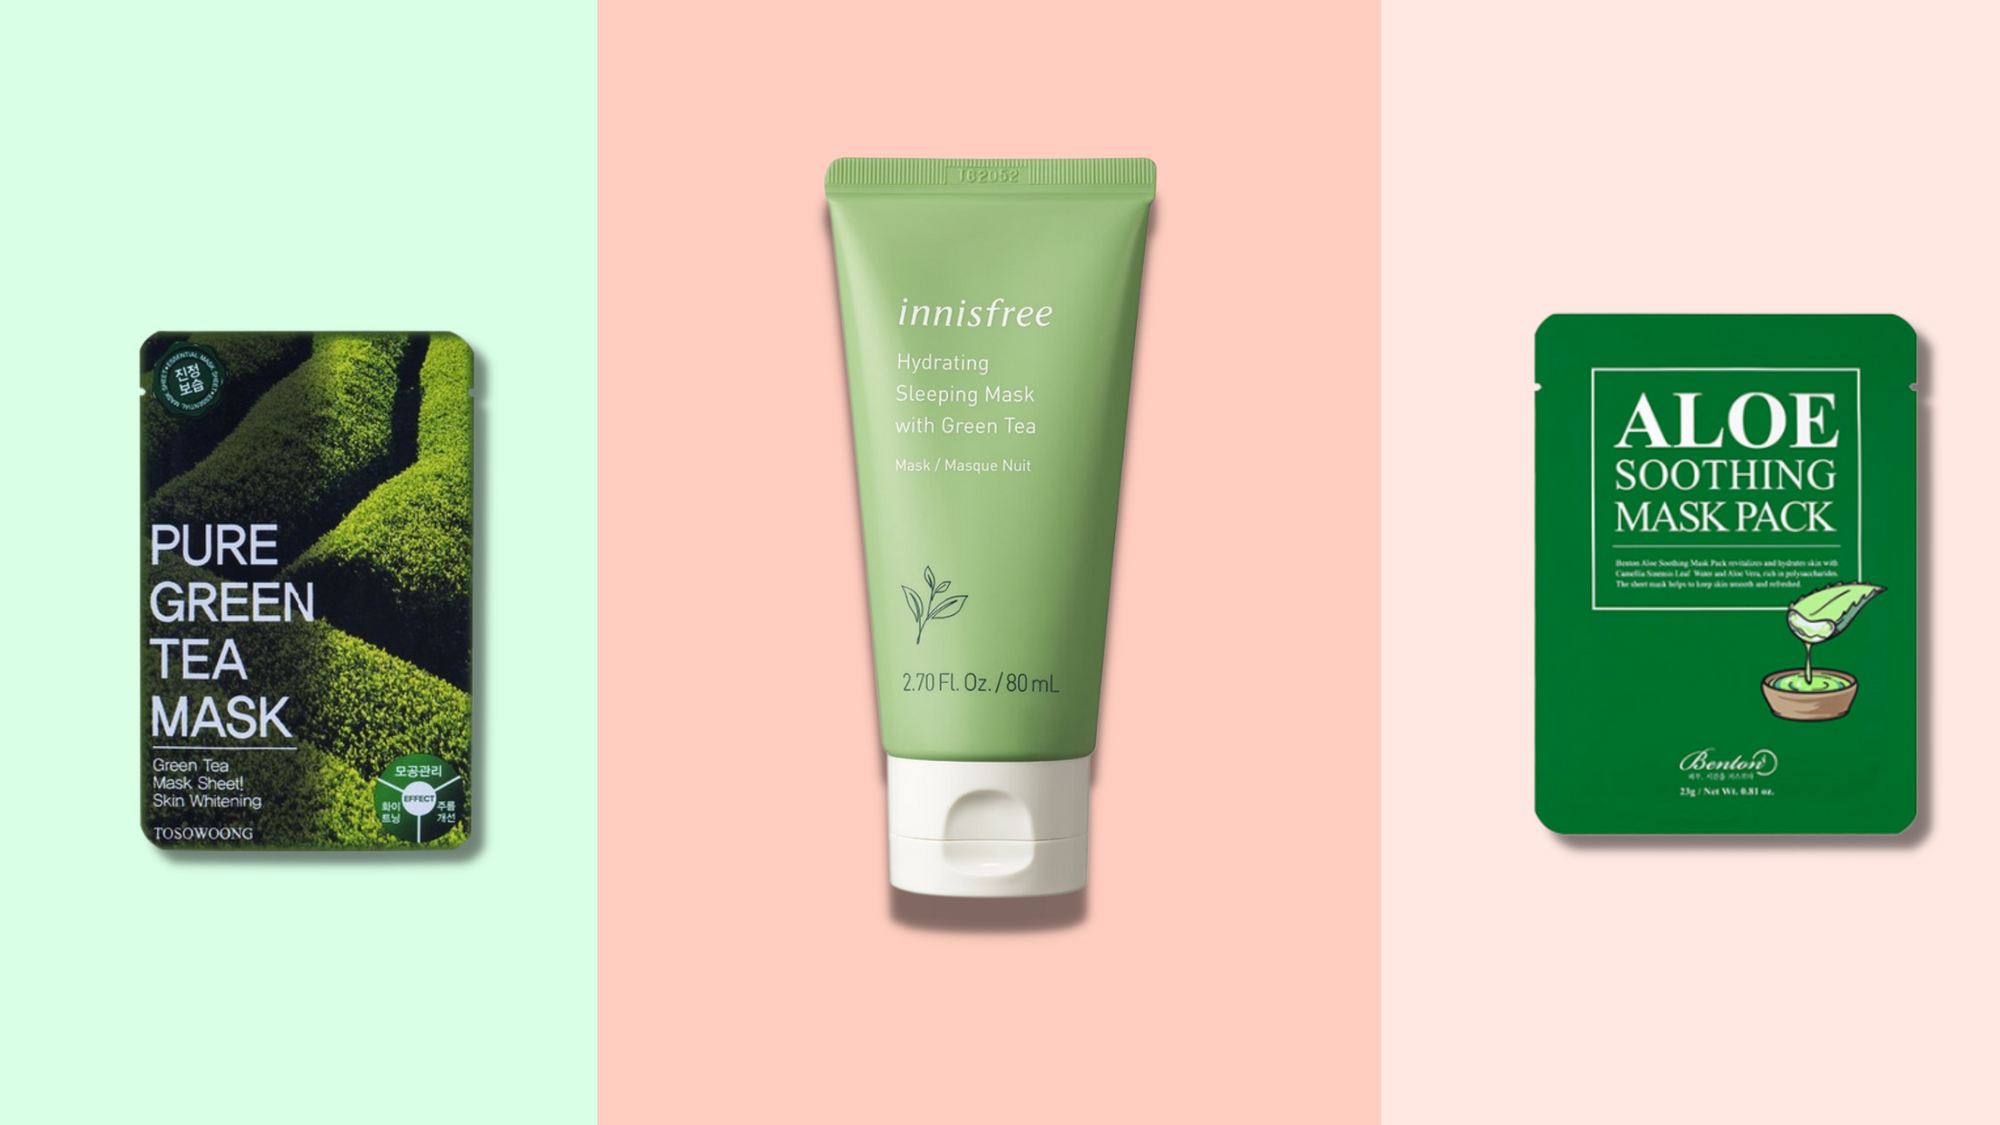 Three Affordable and Effective Korean Masks with Green Tea